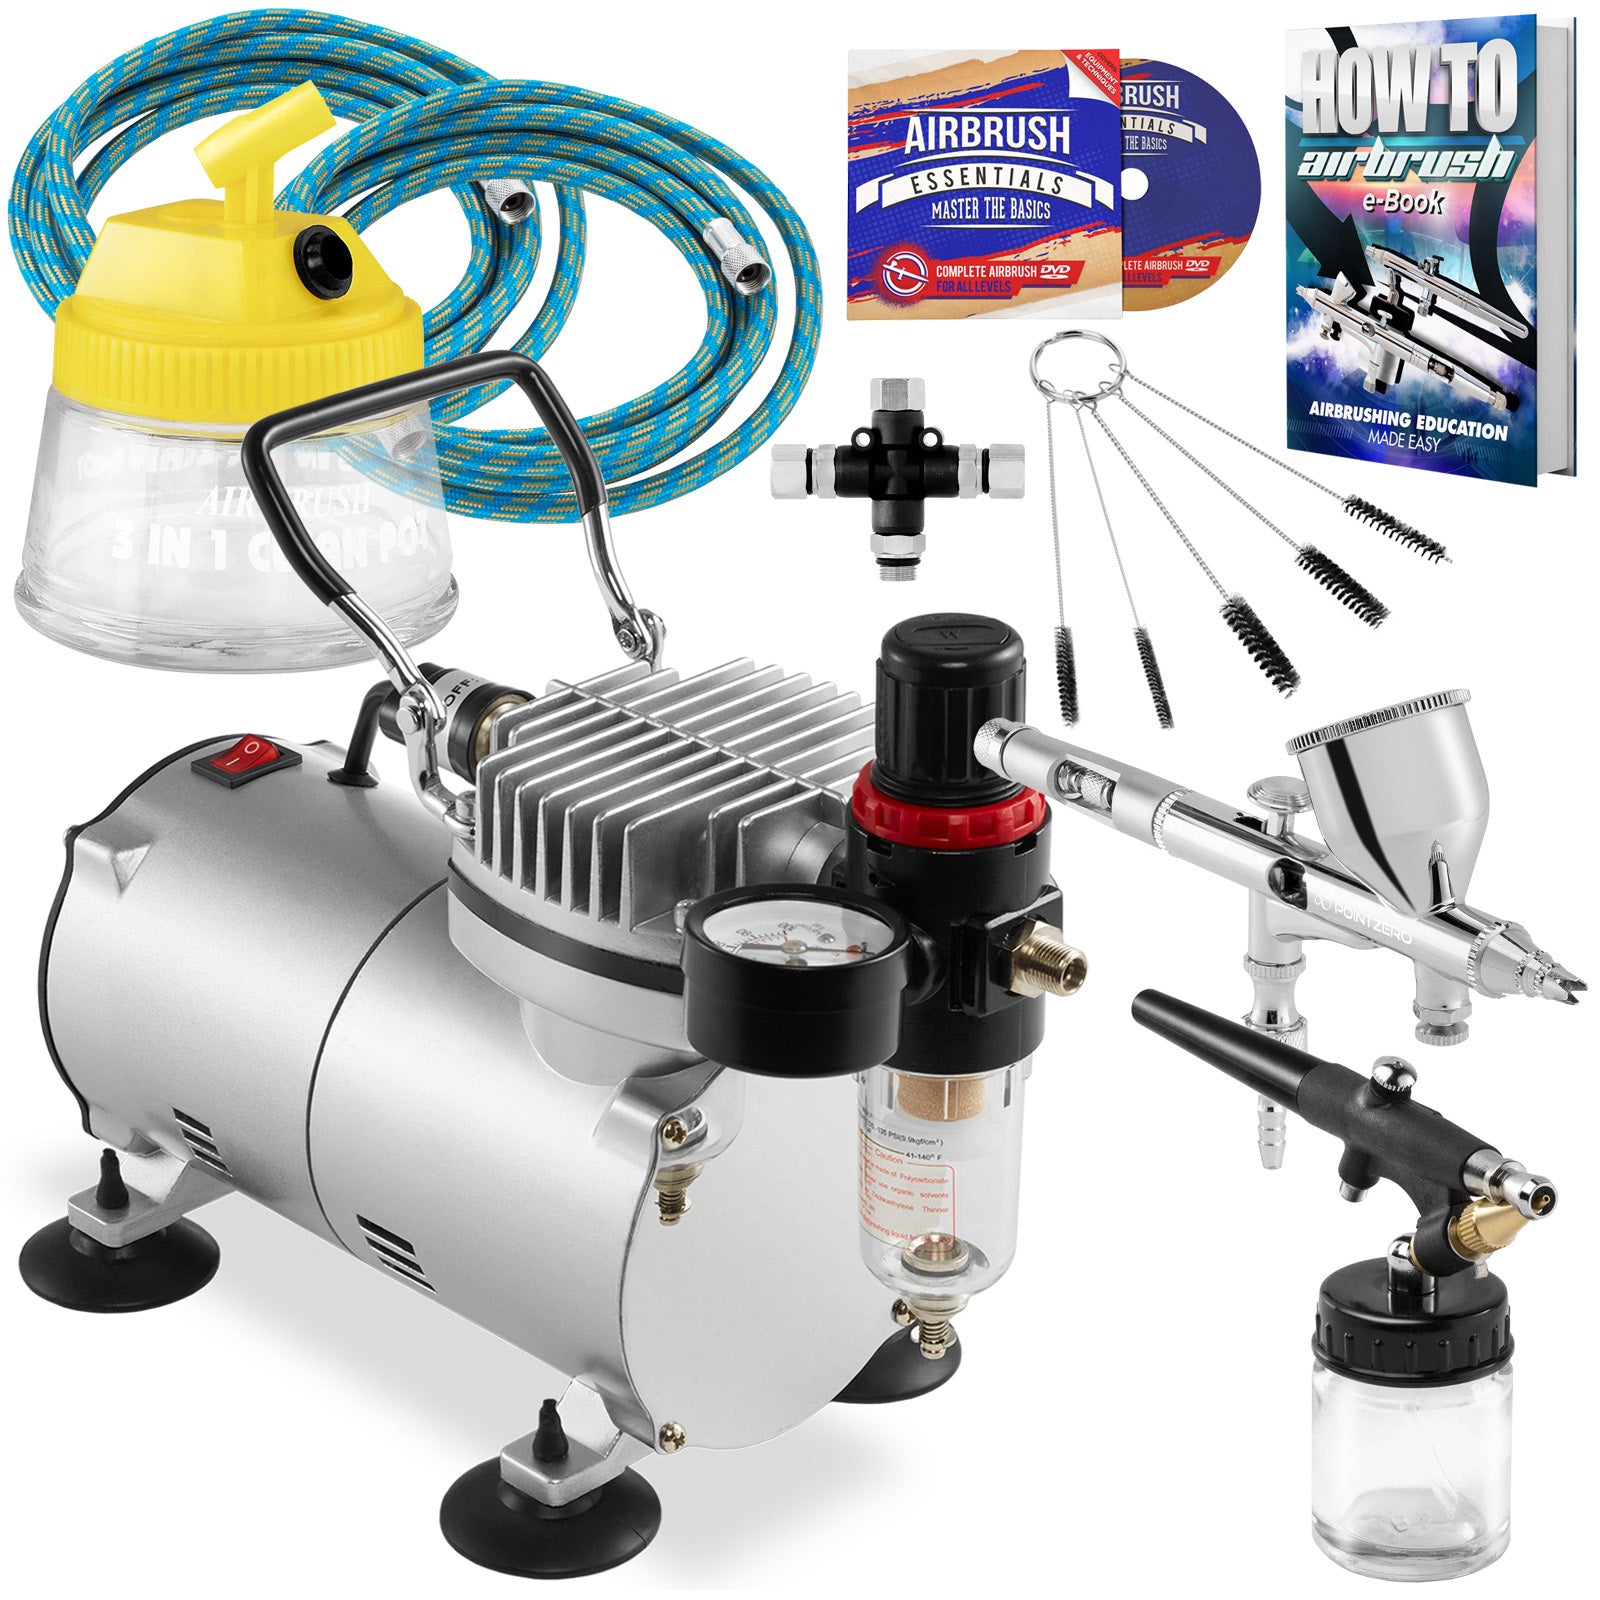 Master Airbrush Brand Essential Airbrush Accessories Kit Set; Includes 6 ft. Braided Air Hose, Mini Inline Filter, Quick Disconnect, Airflow